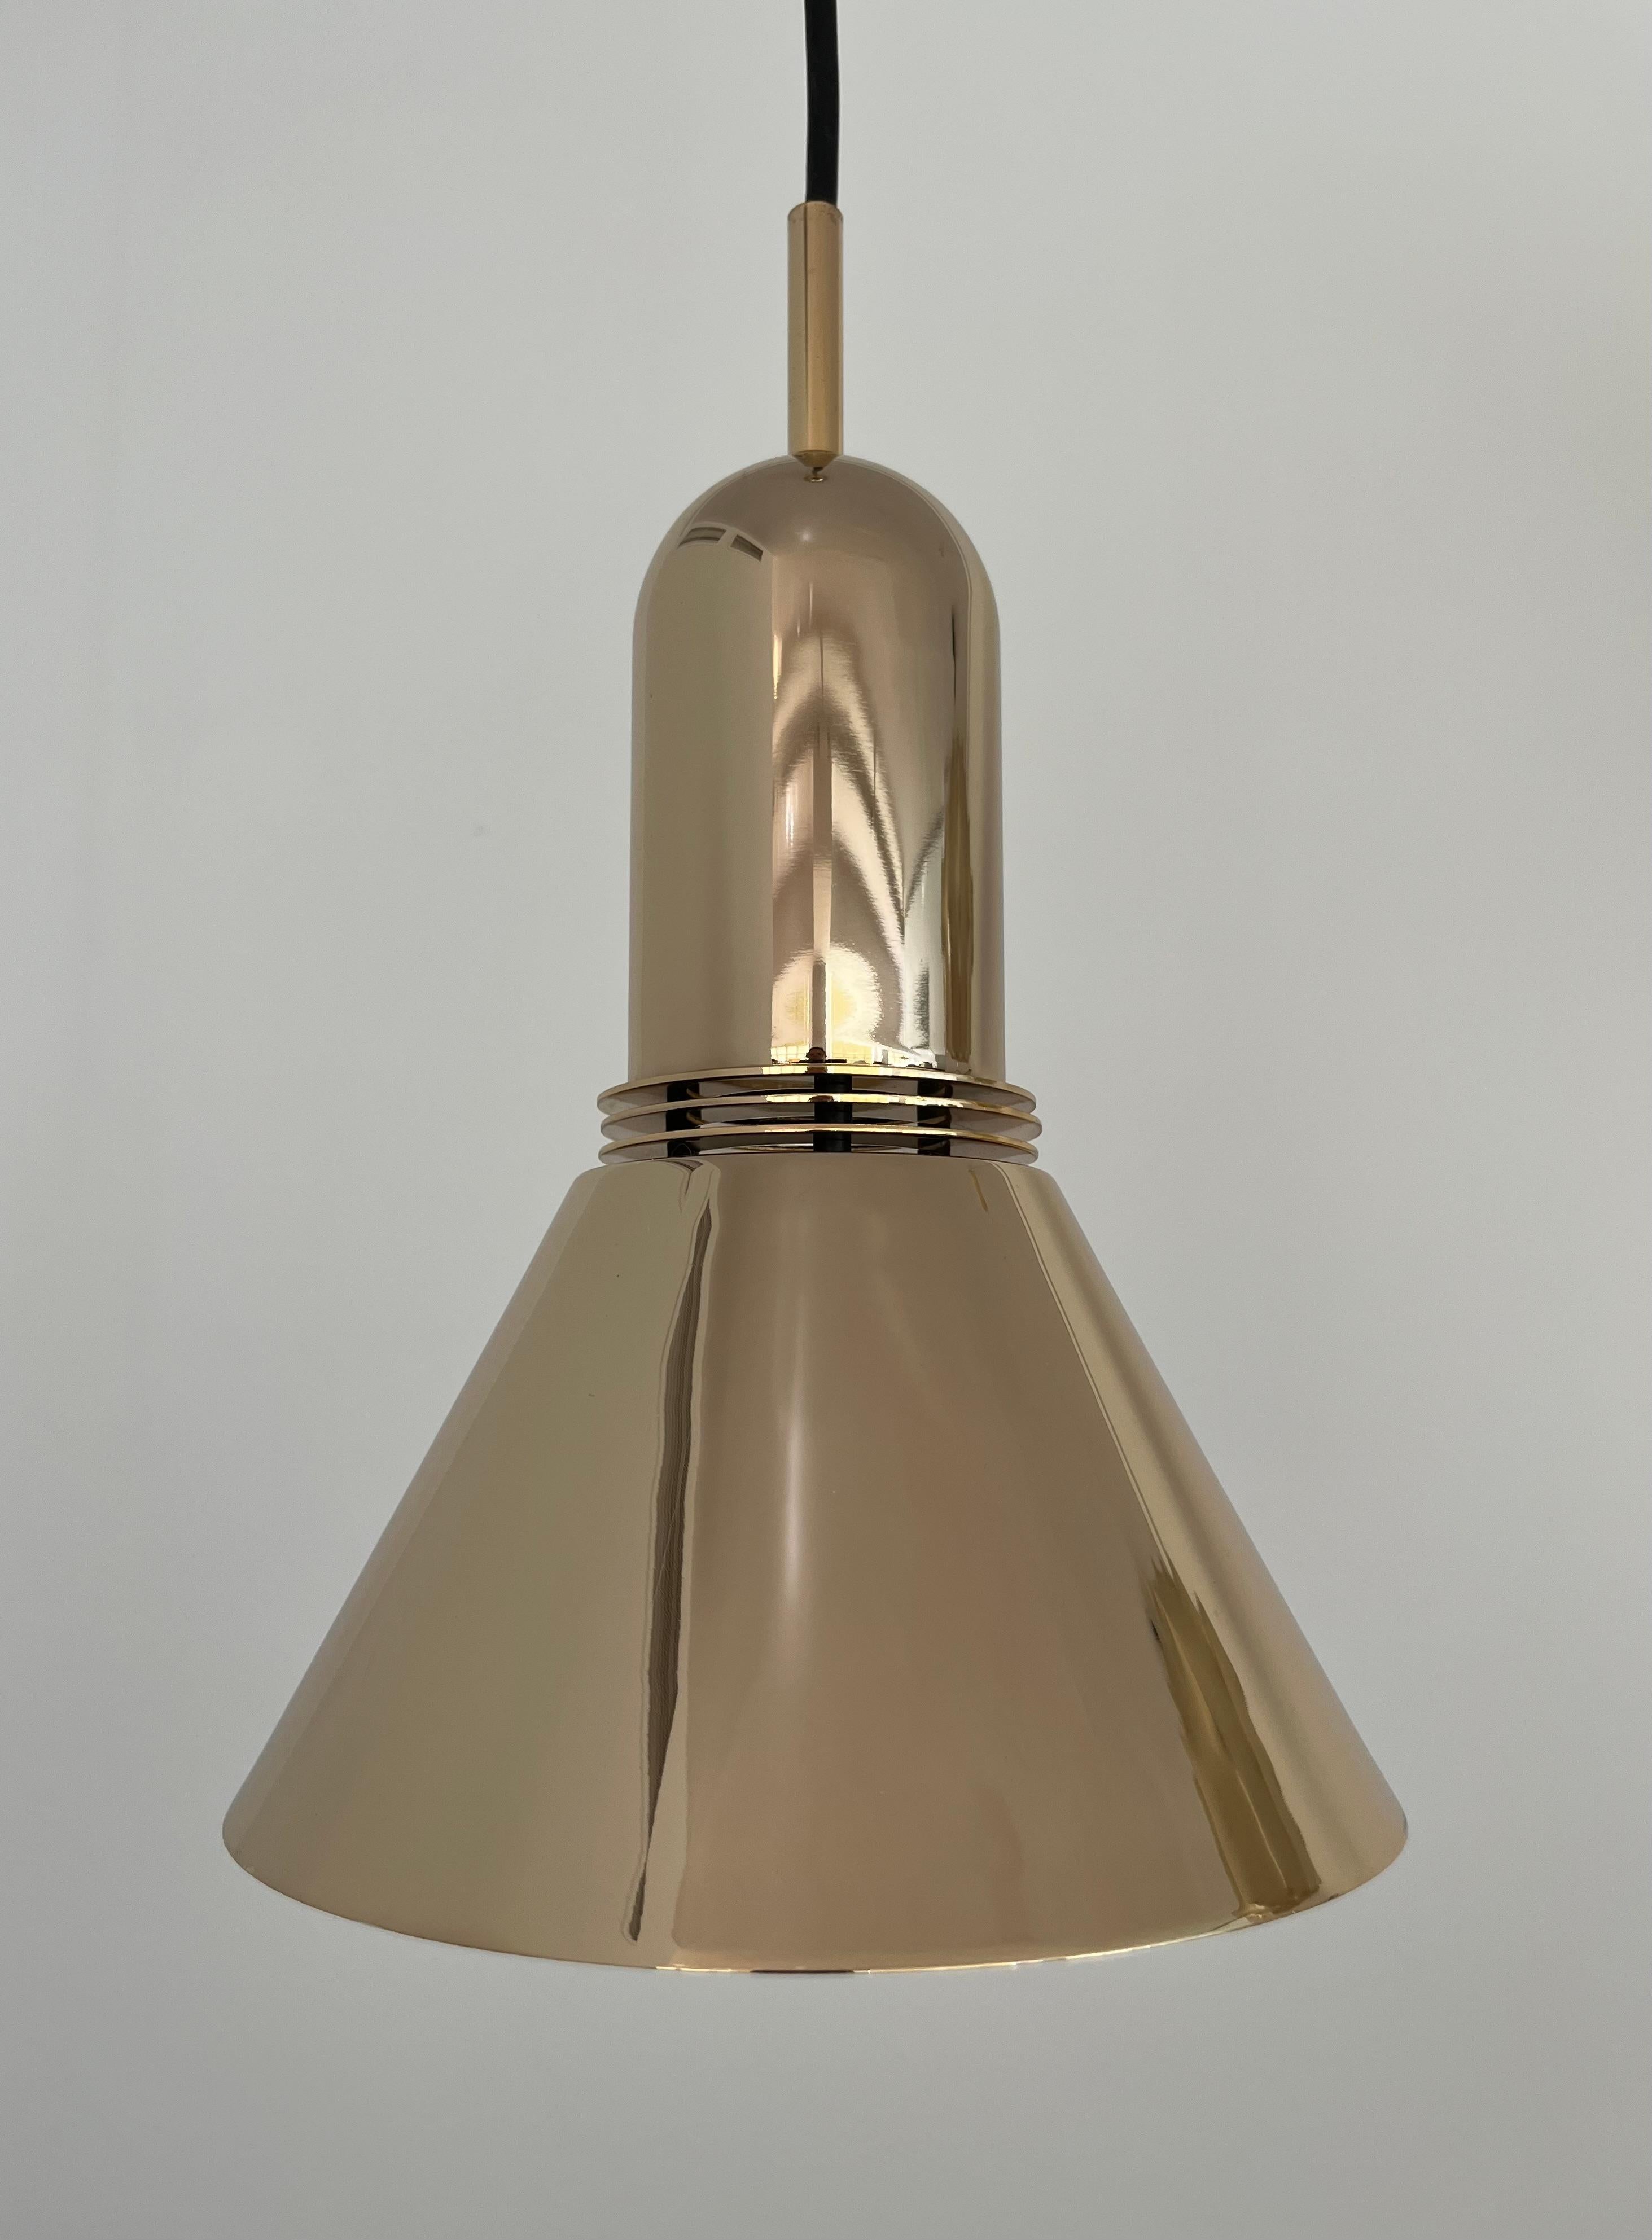 Beautiful Mid-Century Gold Long Chandelier by Leonardo Marelli for Estiluz. Model: T-1142 Dorado (golden). This fixture was designed and manufactured in Barcelona (Spain) during 1970s. Exterior: Chrome plating in gold and interior: white